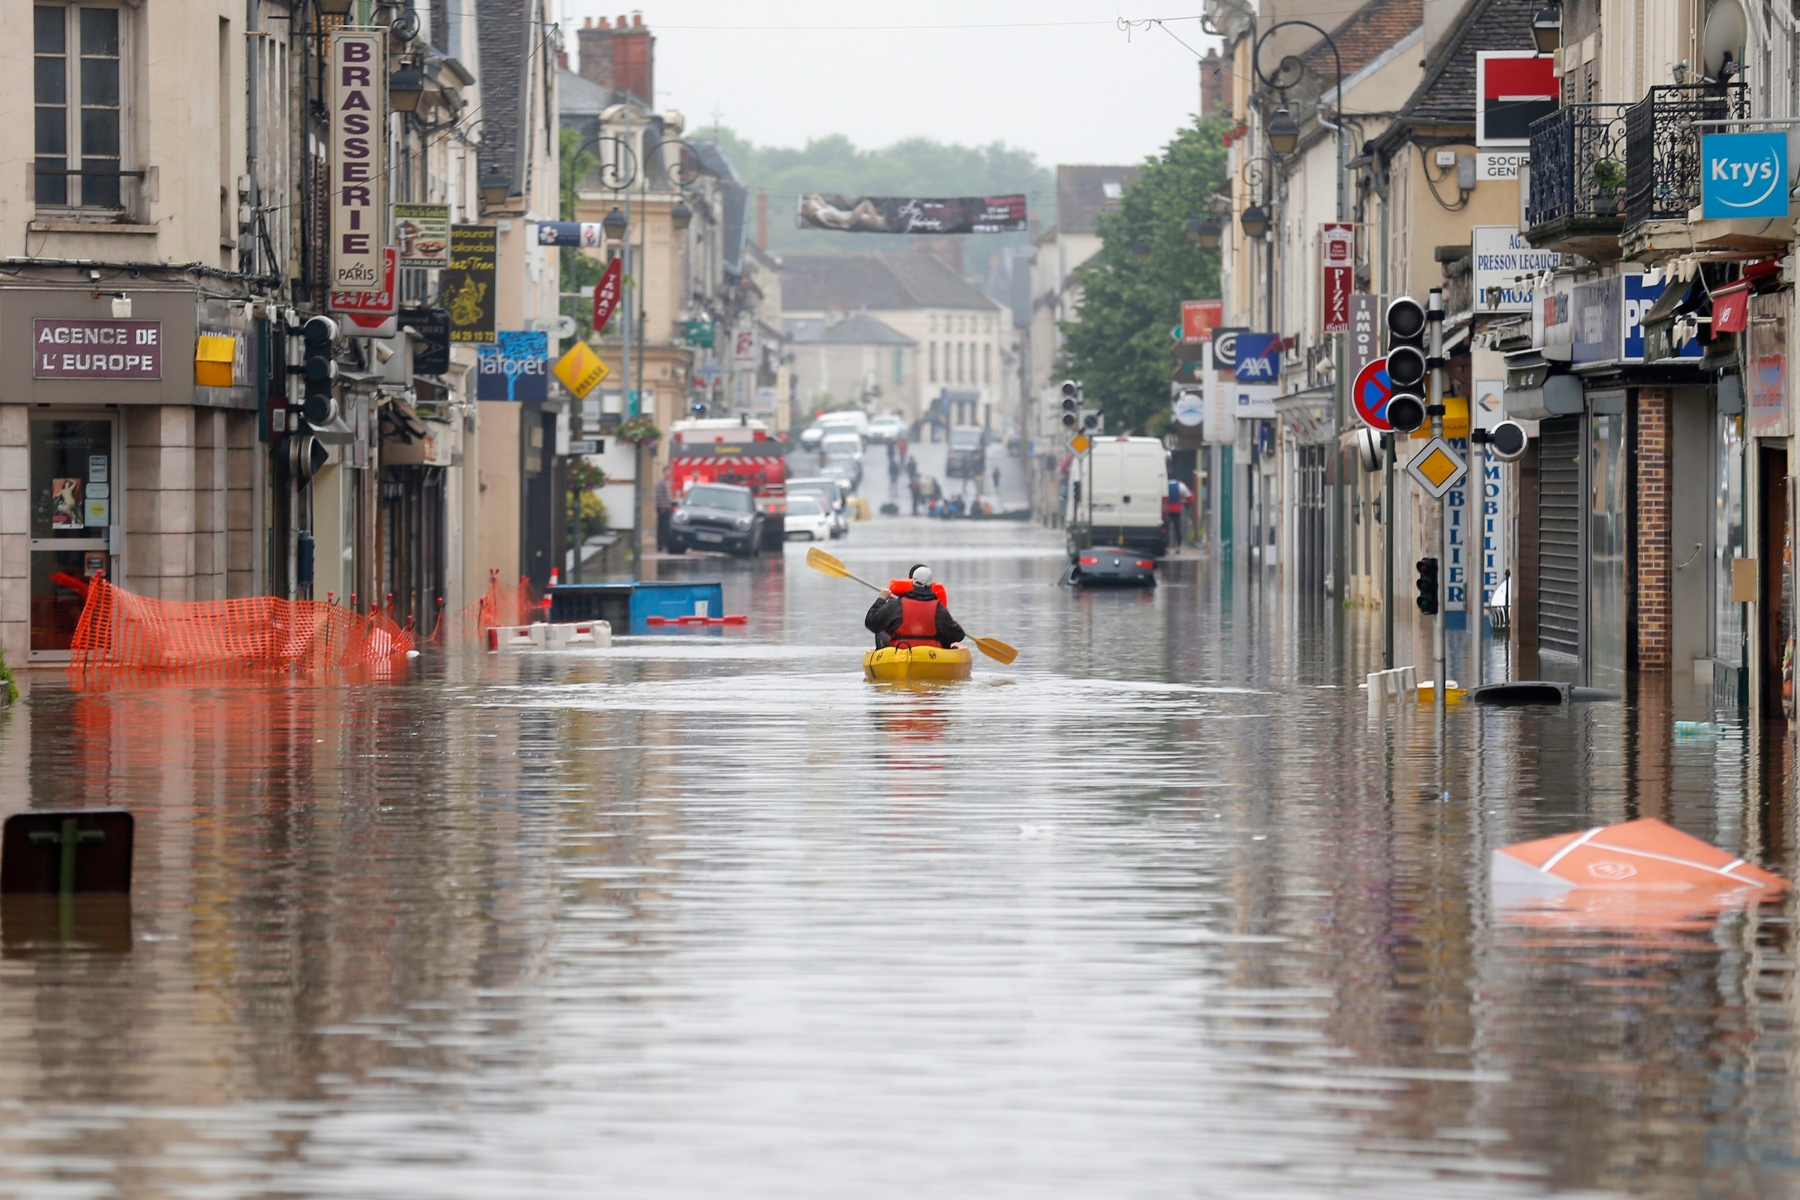 Residents use a canoe to evacuate in downtown Nemours, 50 miles south of Paris, Thursday, June 2, 2016. Floods inundating parts of France and Germany have left five people reported dead and thousands trapped in homes or cars, as rivers have broken their banks from Paris to Bavaria. (AP Photo/Francois Mori) France Floods